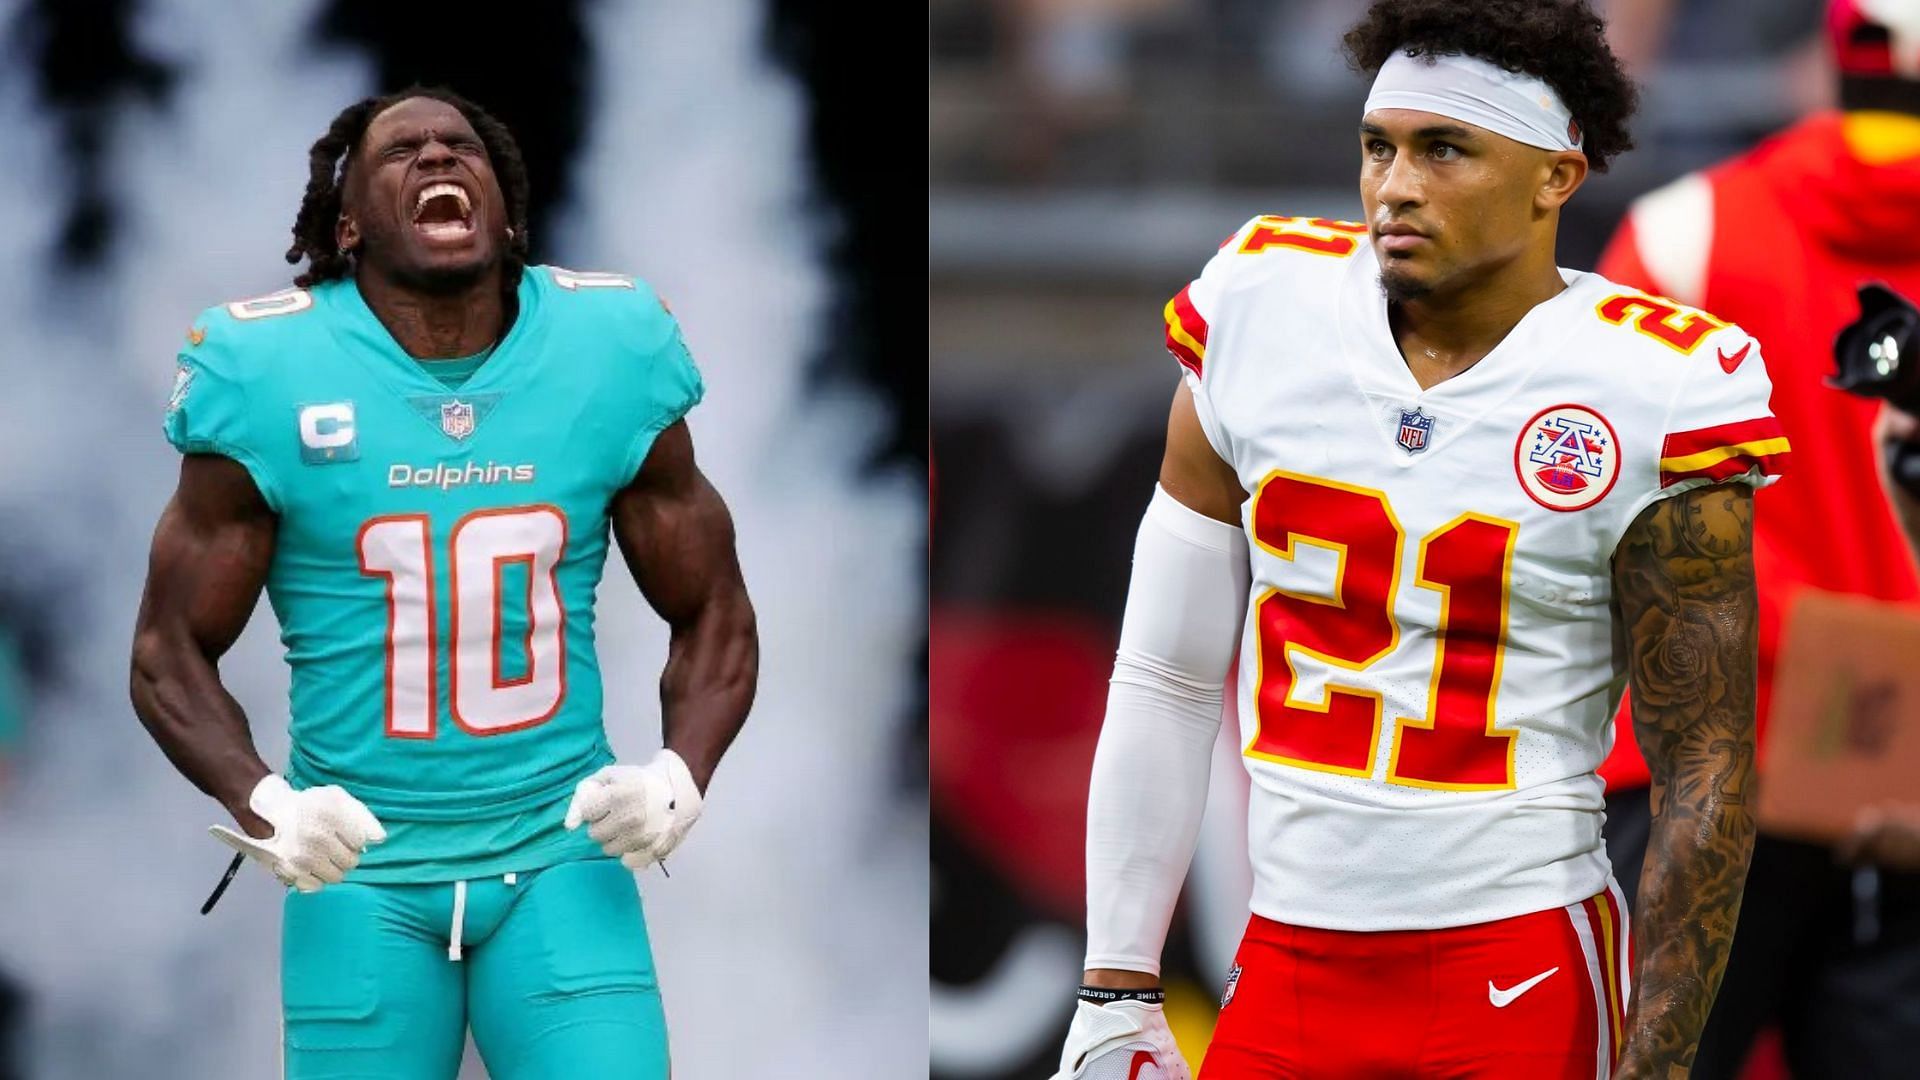 NFL fans label Dolphins as &lsquo;frauds&rsquo; after Tyreek Hill&rsquo;s mistake results in TD for Chiefs defense